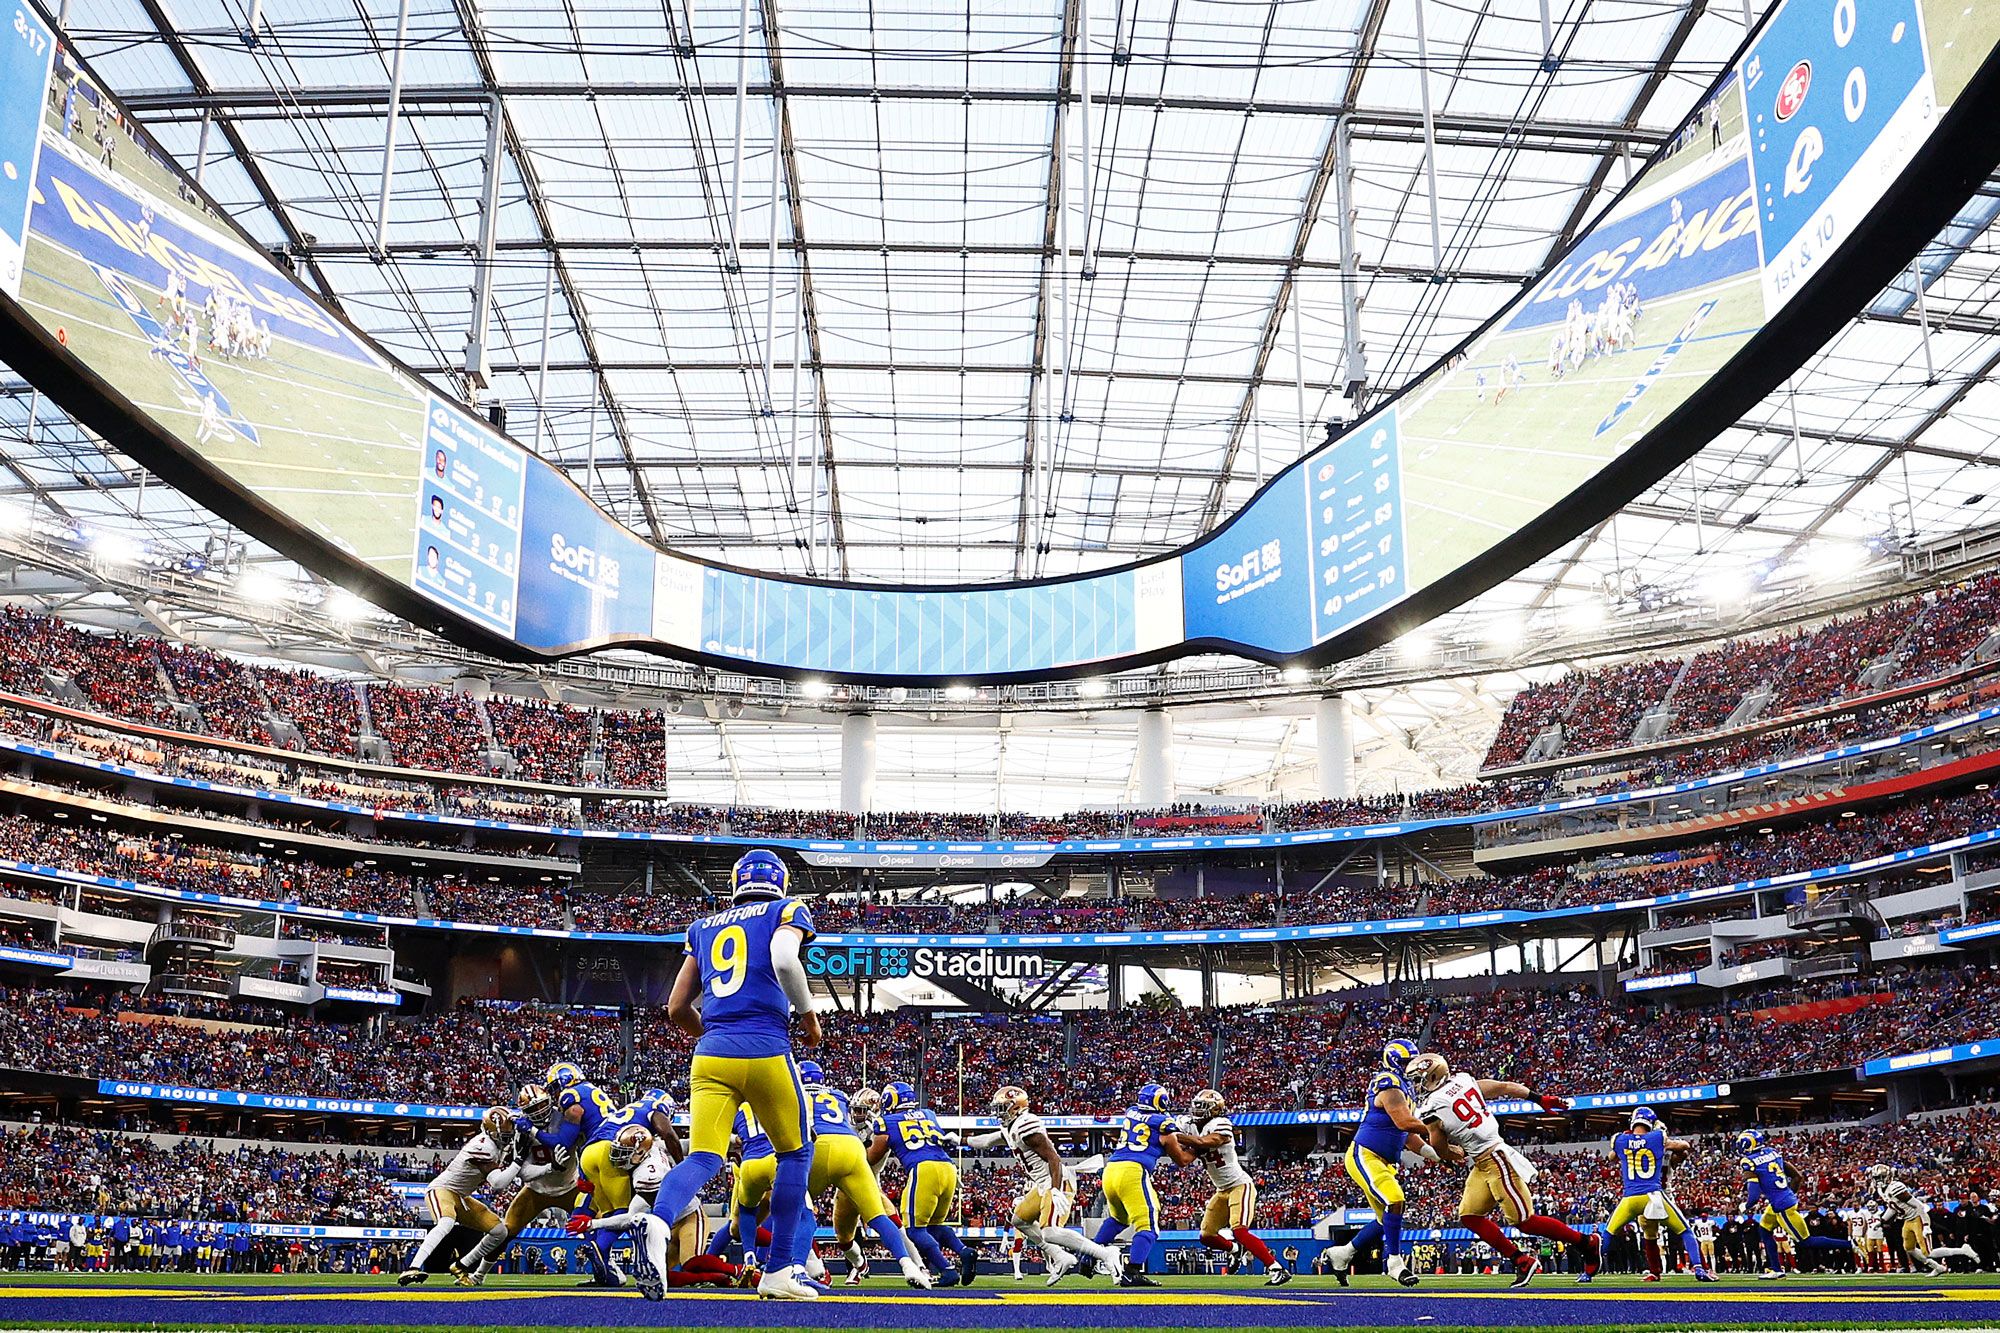 6 things to know about California's SoFi Stadium, the site of